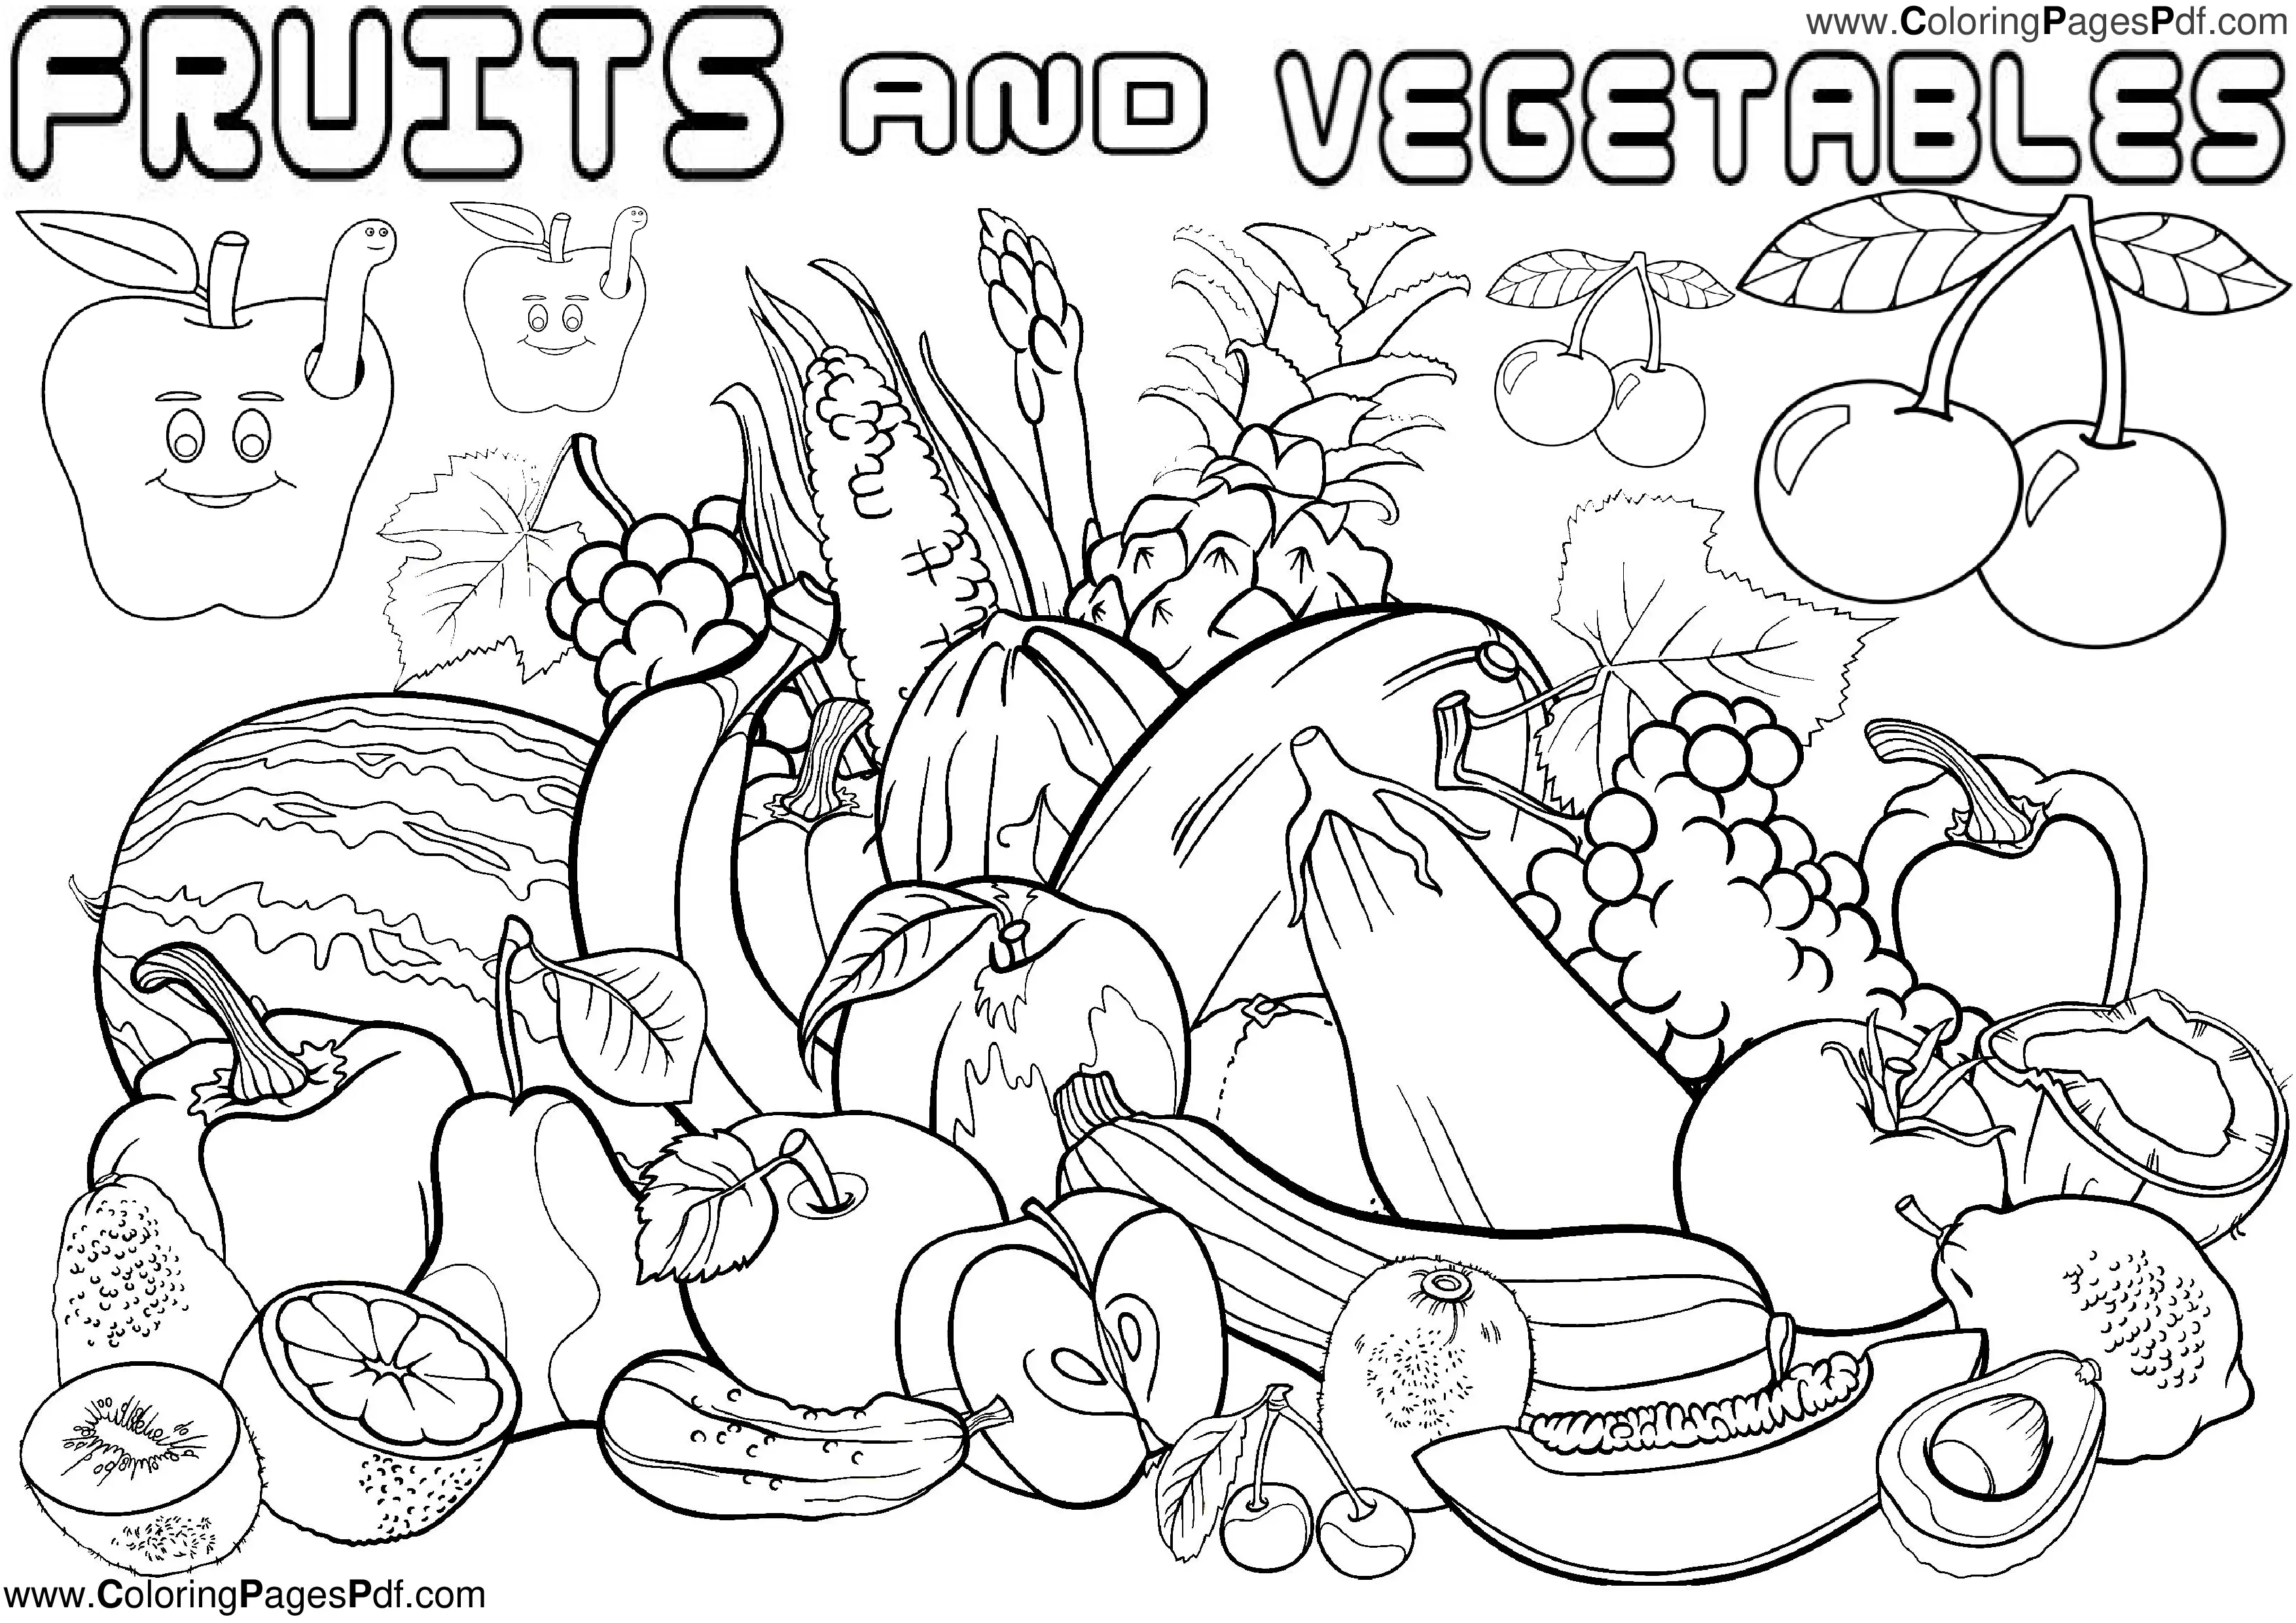 Coloring Fruits and Vegetables